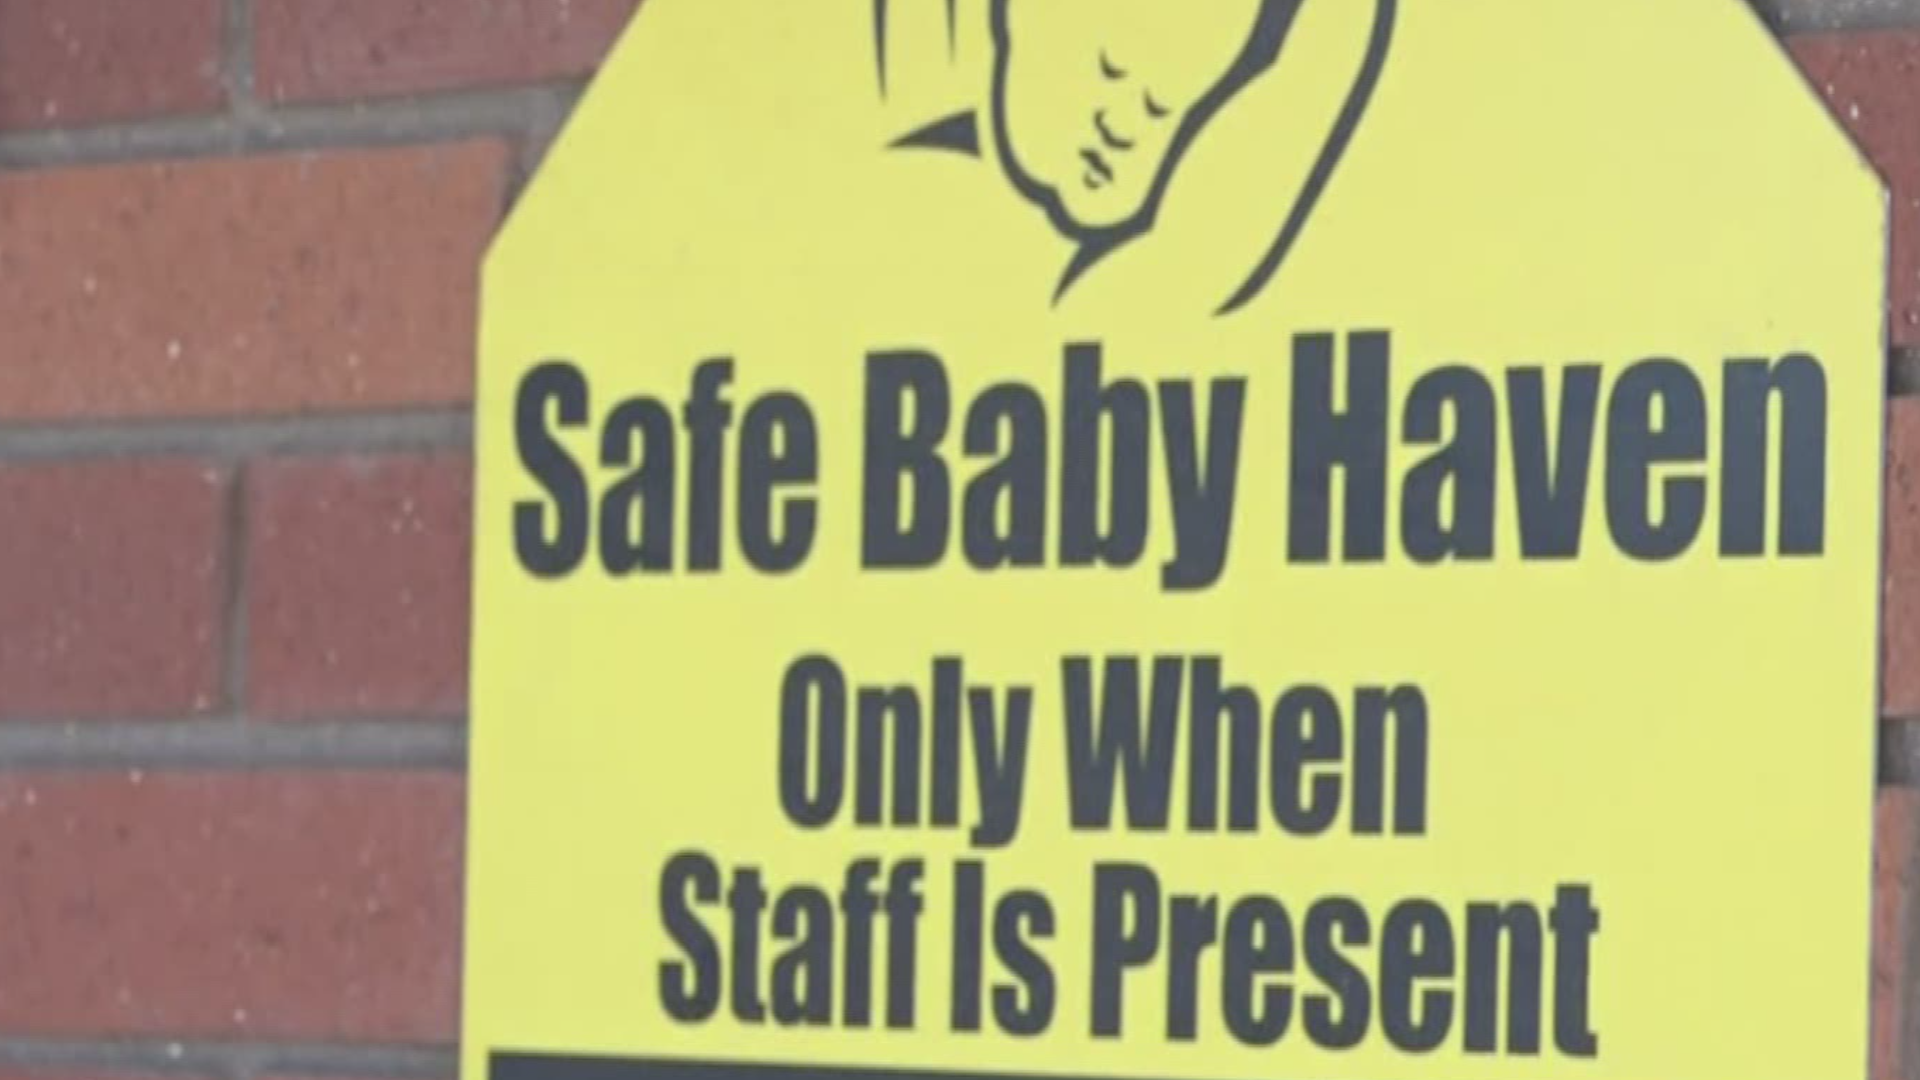 The safe haven law is in place to make sure infants are not abandoned and to make sure the baby is cared for. But are there restrictions on the law? We verify.